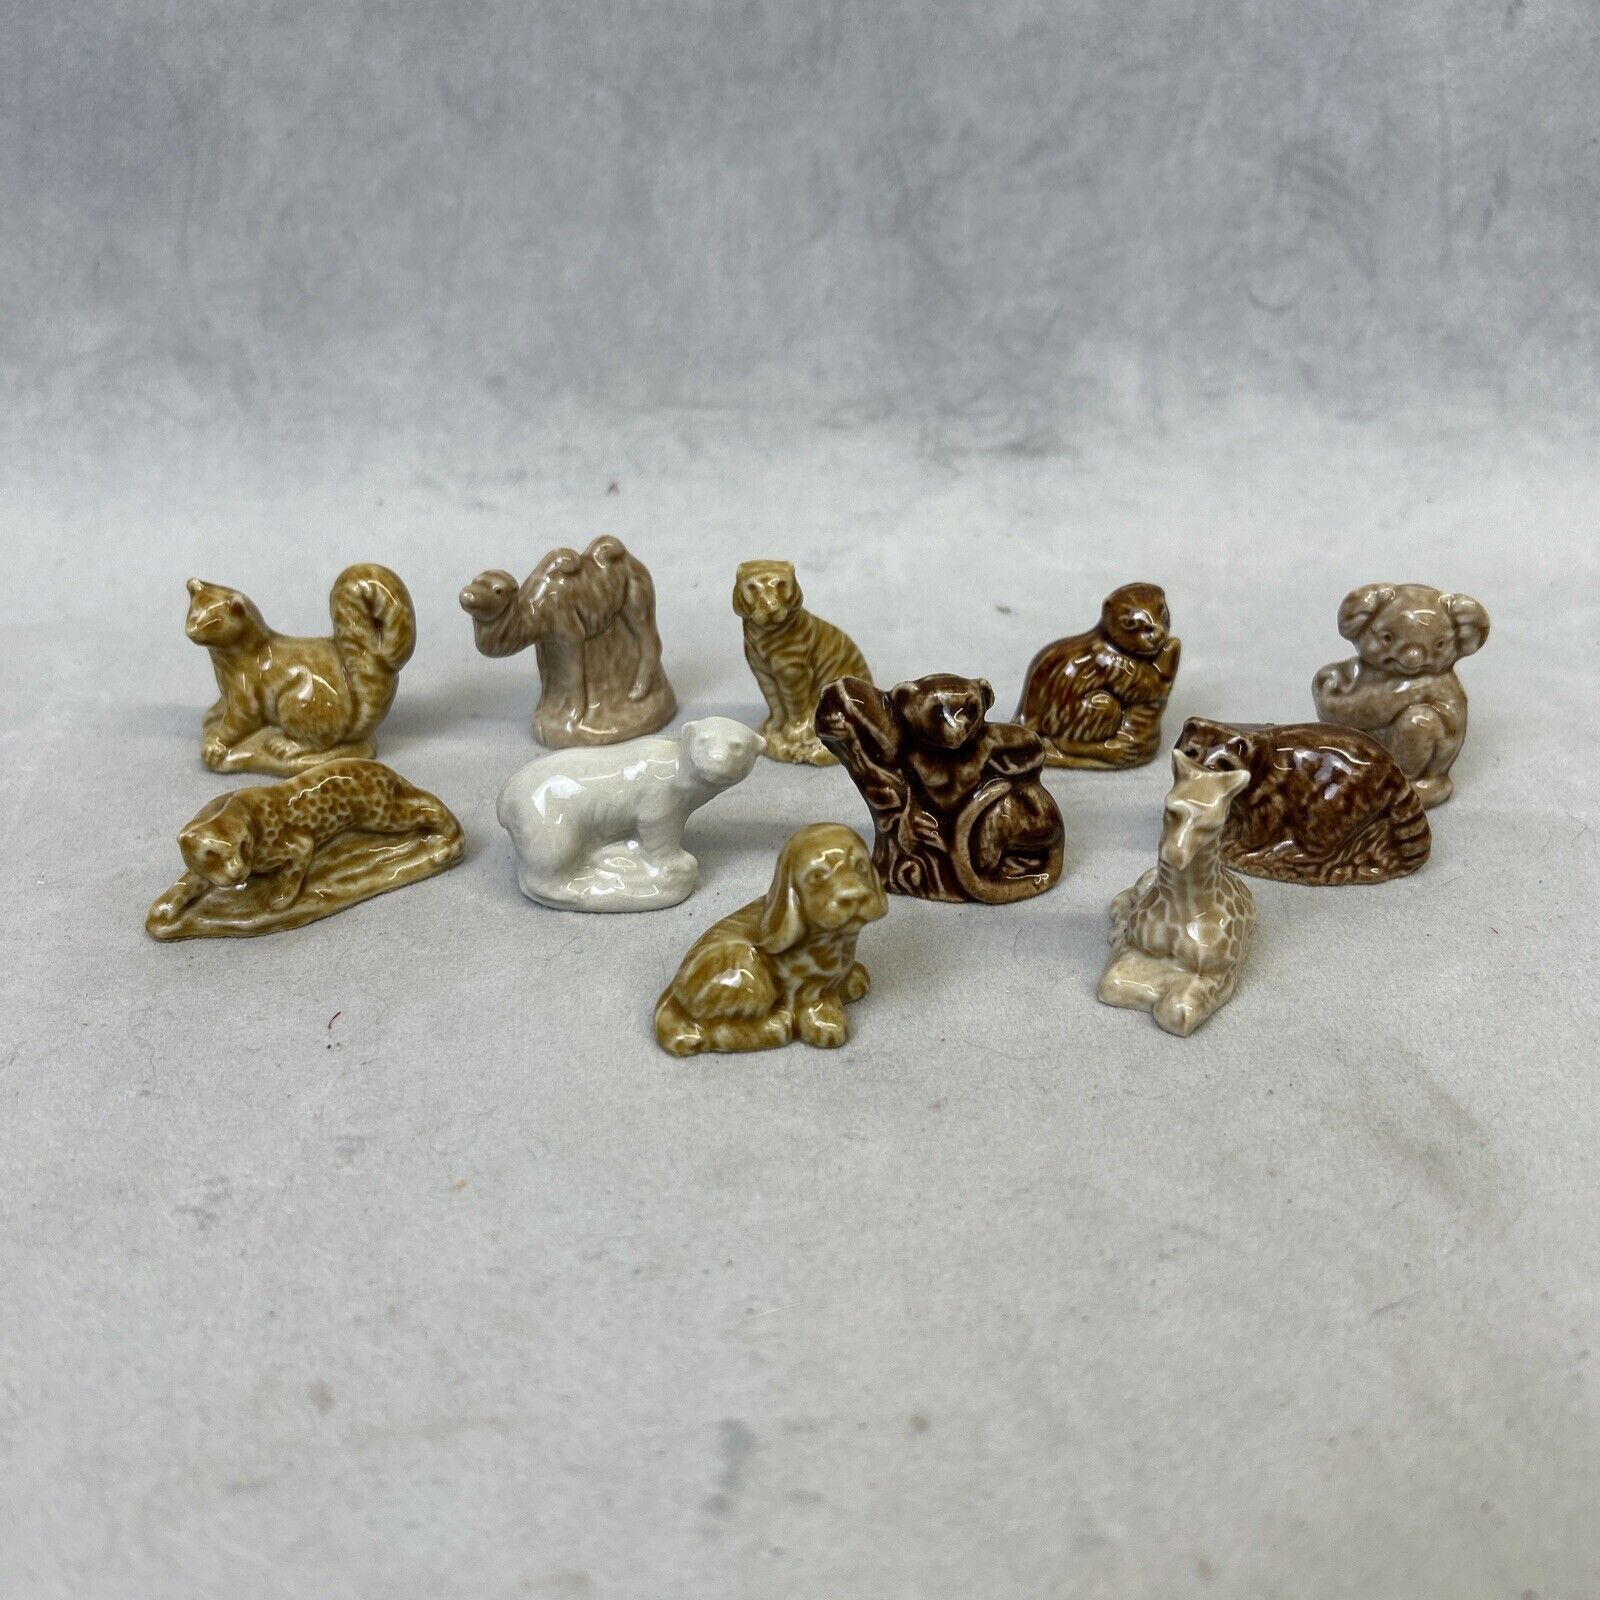 Wade Red Rose Tea Lot Of 11 Vintage England Whimsies Mixed Animal Figurines